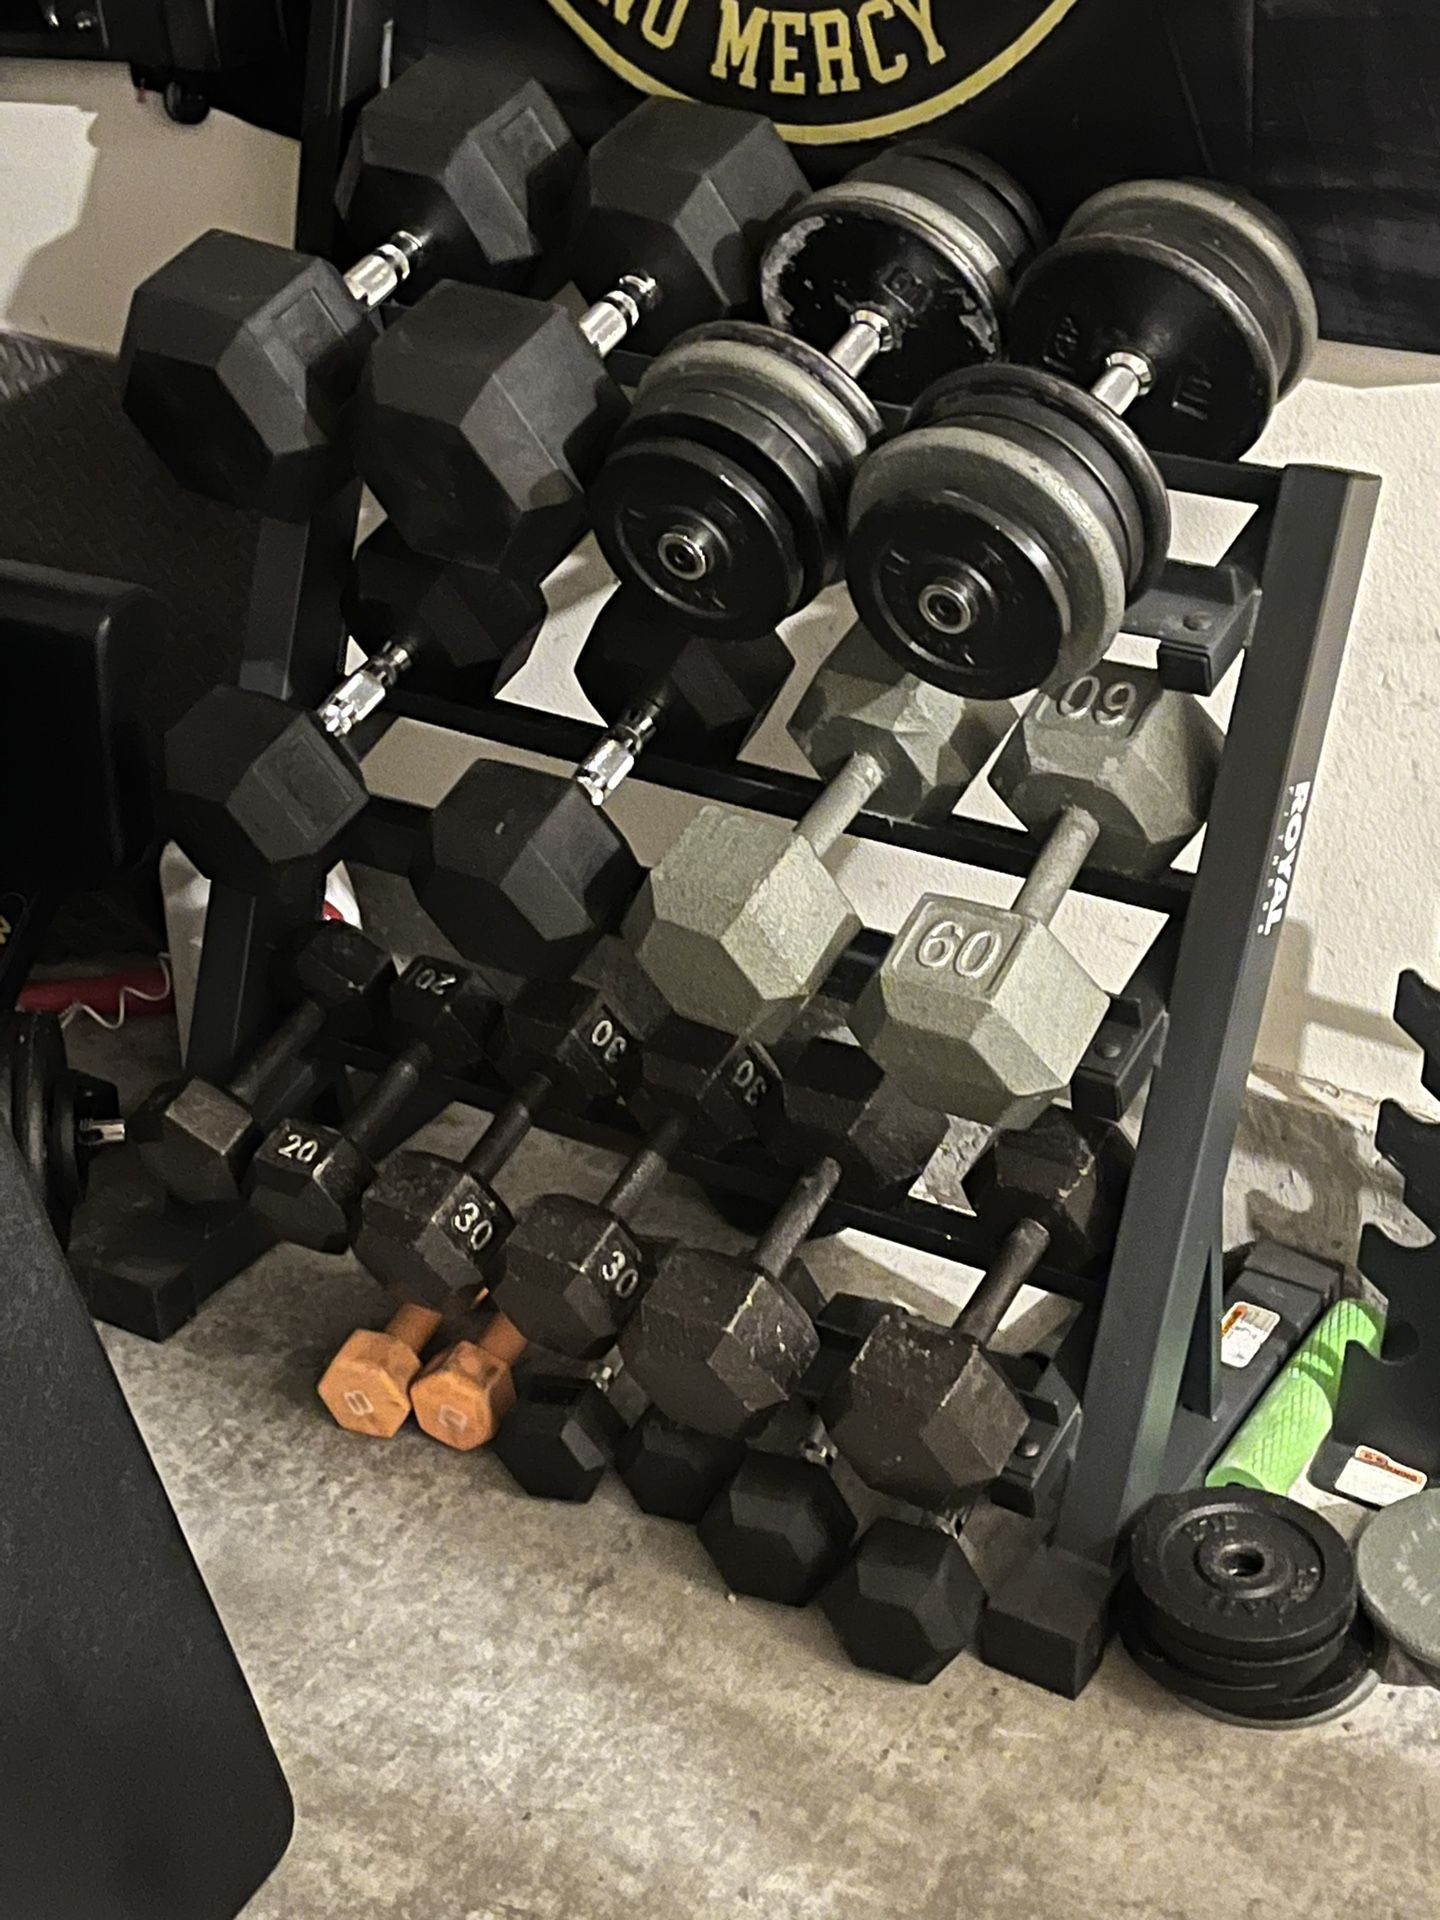 Free Weights And Bench